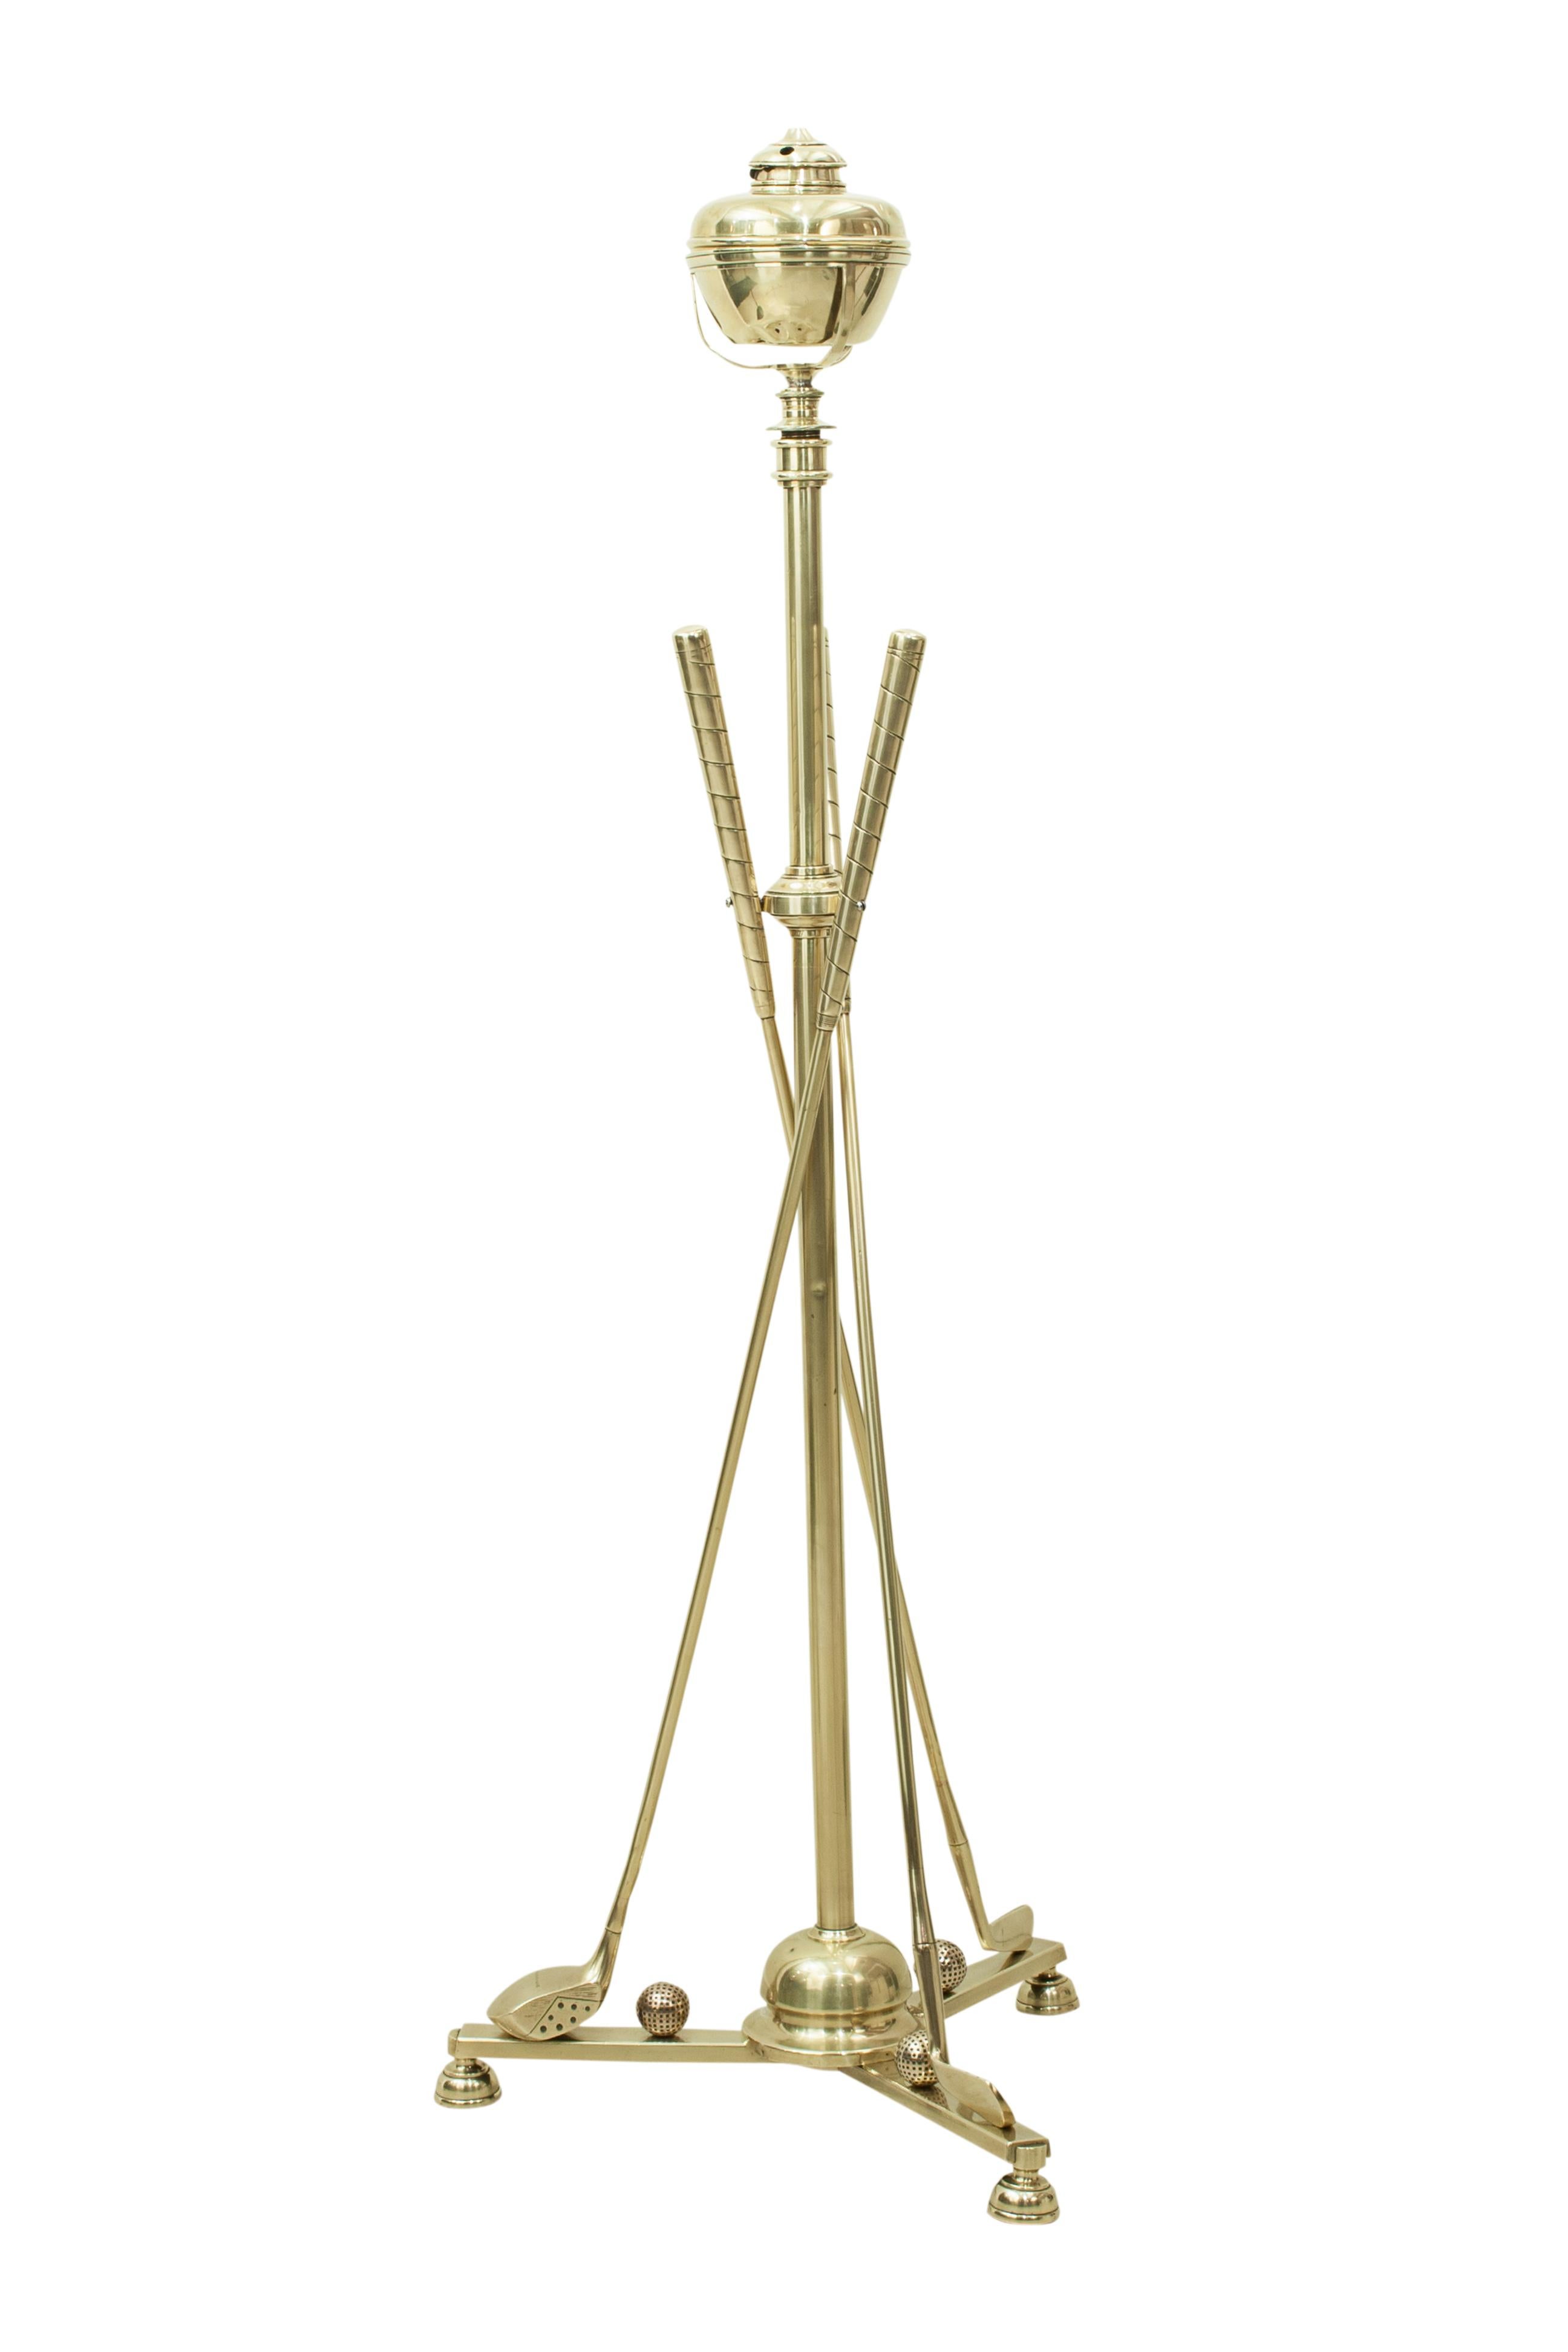 Antique brass golf lamp with three golf clubs.
An excellent quality telescopic brass floor lamp, the central tubular standard issuing from a triform platform base mounted with three golf clubs and three golf balls. The three brass clubs on the base